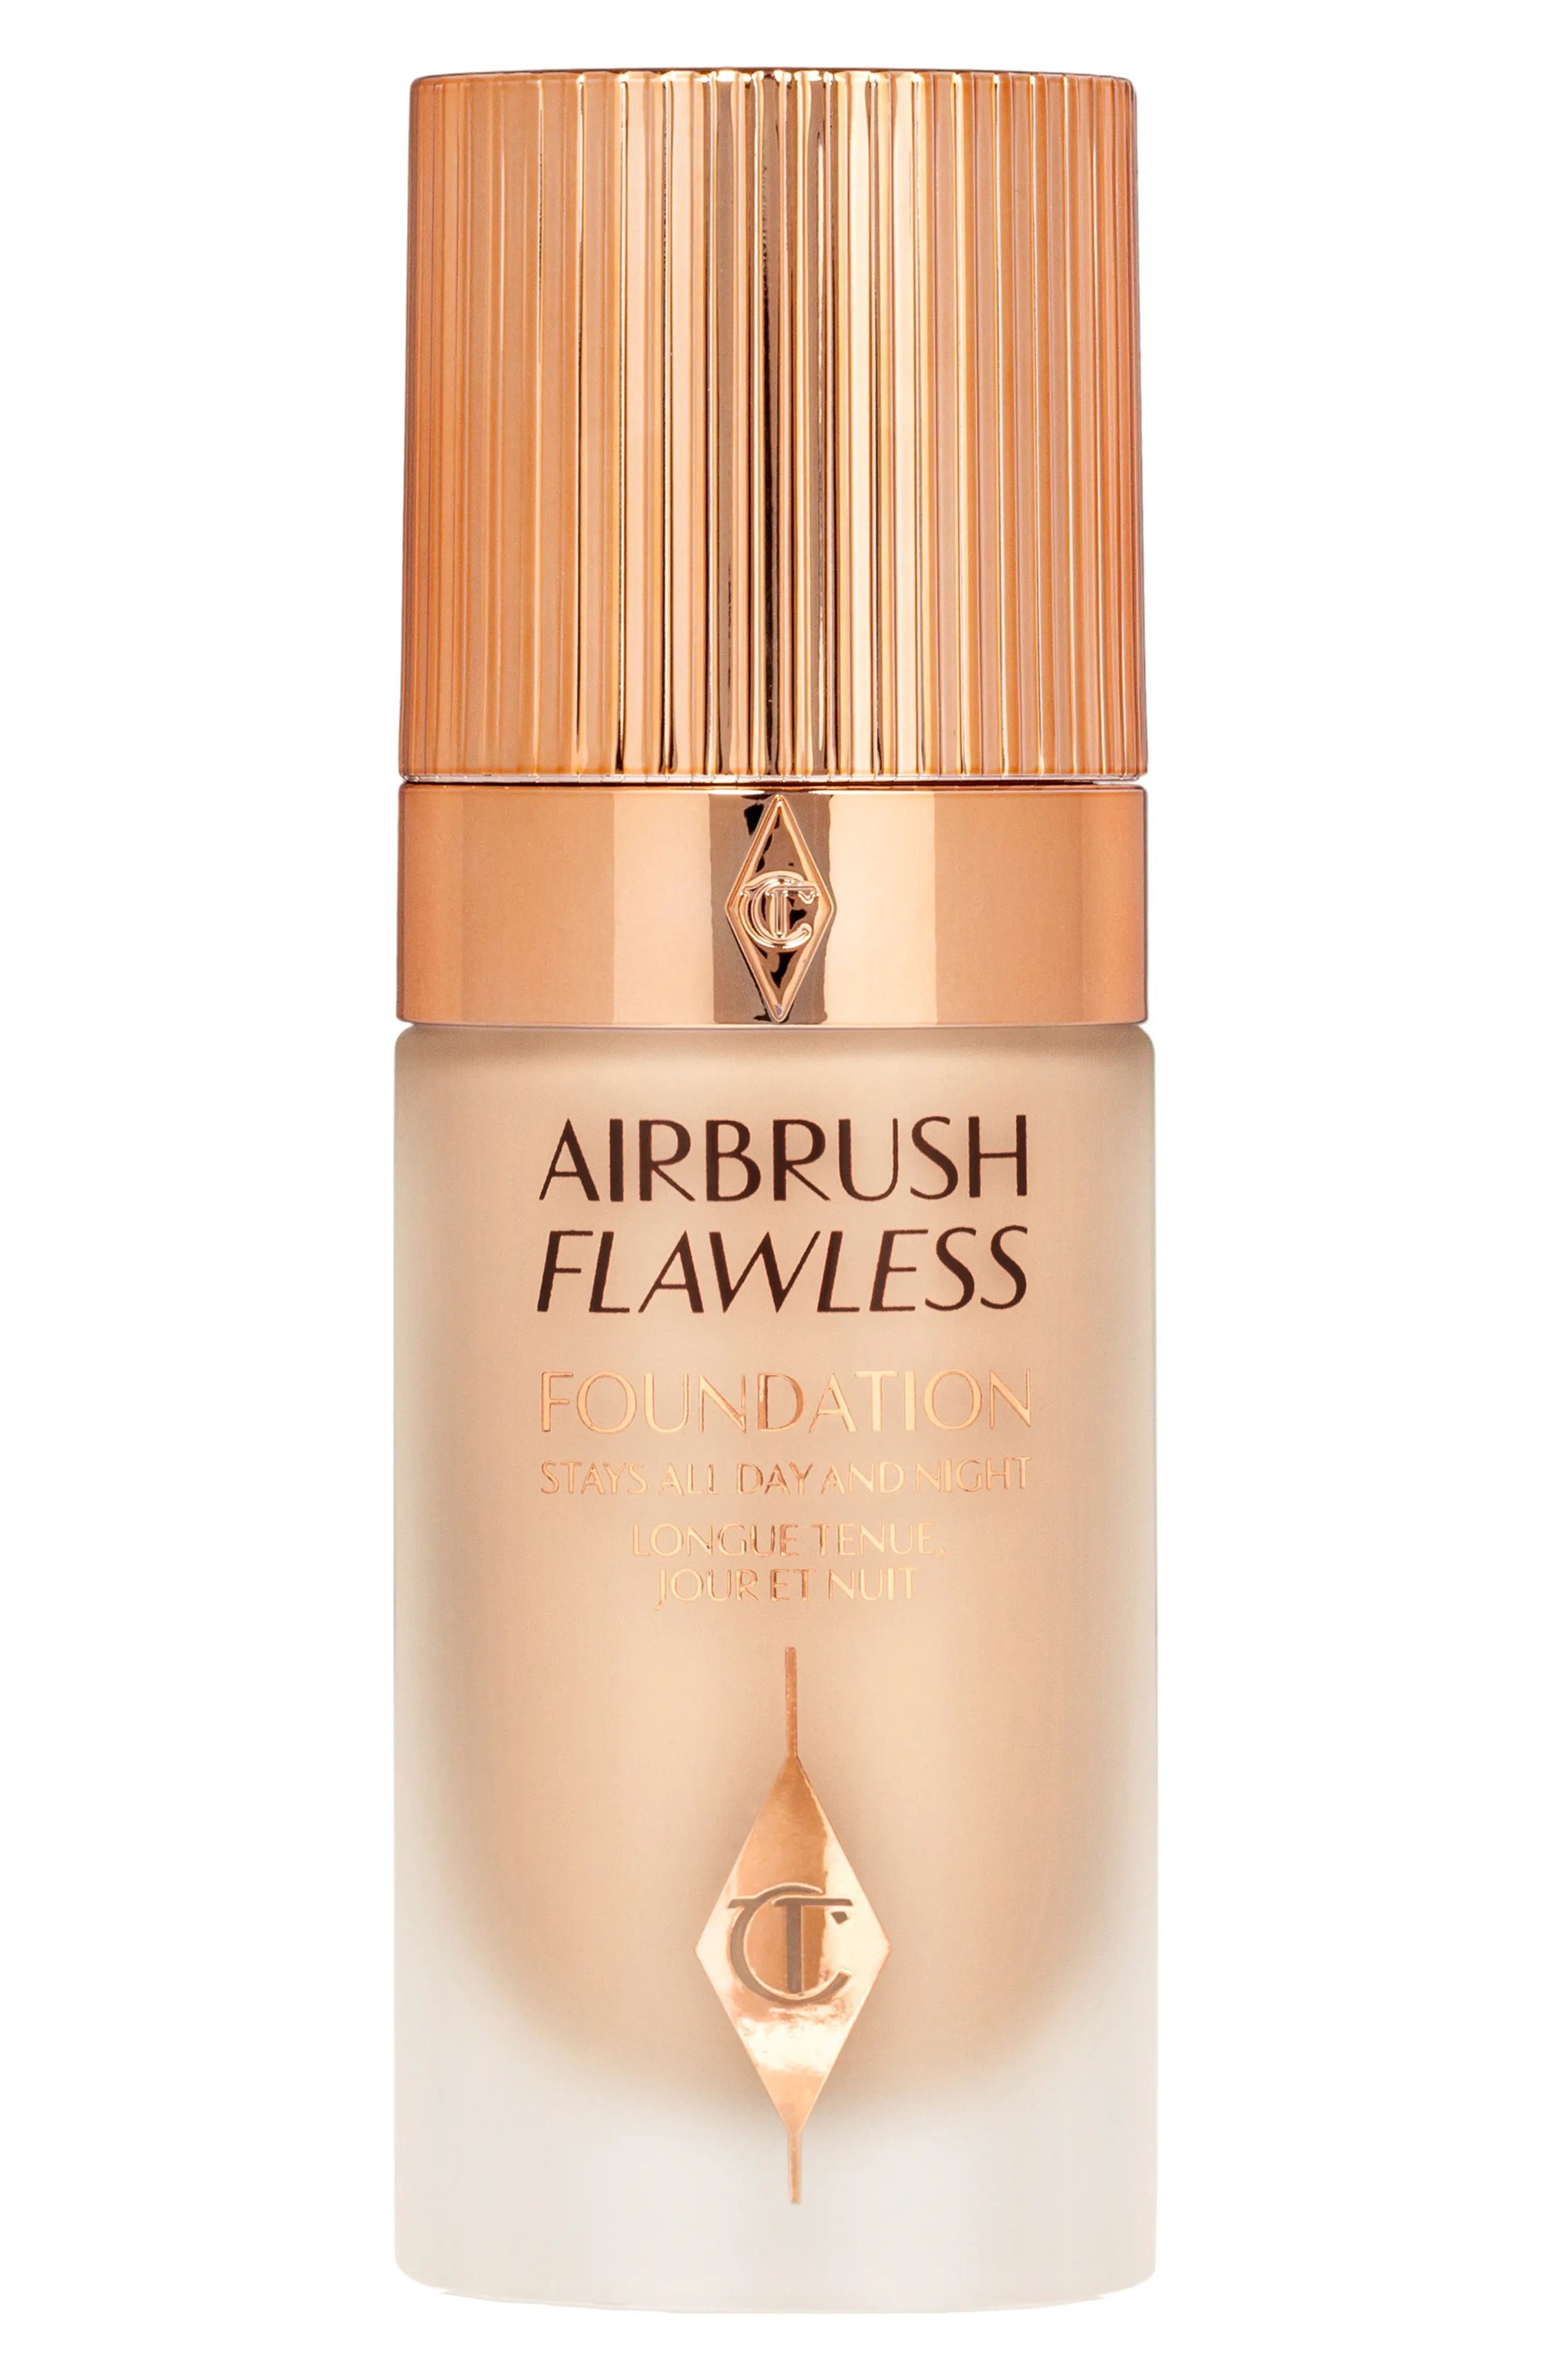 Charlotte Tilbury Airbrush Flawless Foundation in 05.5 Neutral at Nordstrom | Nordstrom